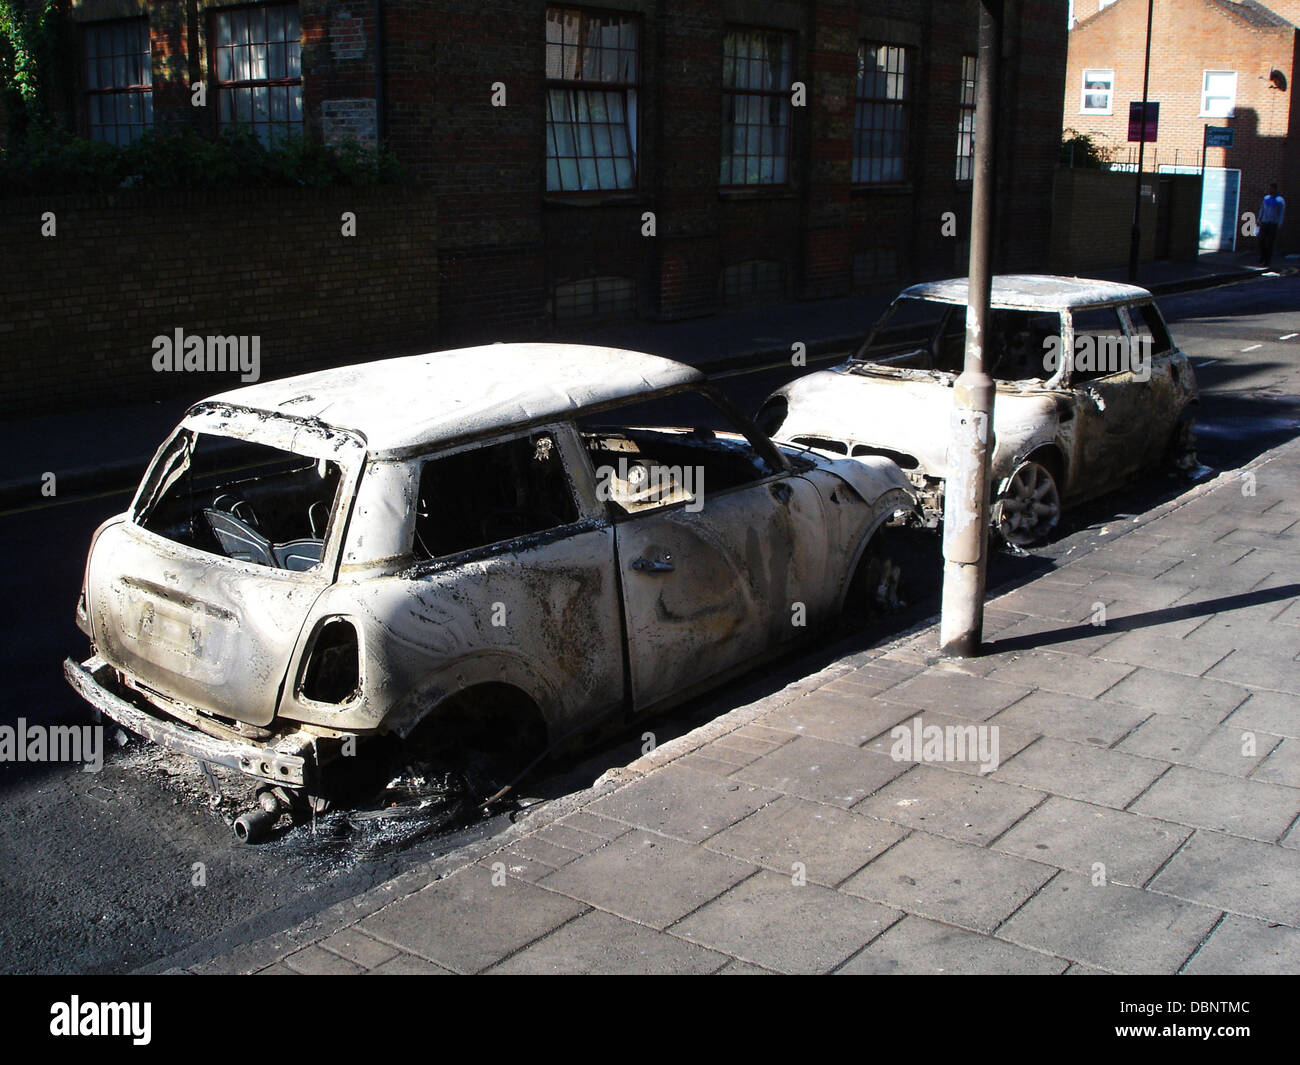 The aftermath of rioting near the Pembury Estate in Hackney, East London. Riots and looting have broken out all across Greater London and are now spreading across the country following the shooting of Mark Duggan by police in Tottenham, North London Londo Stock Photo